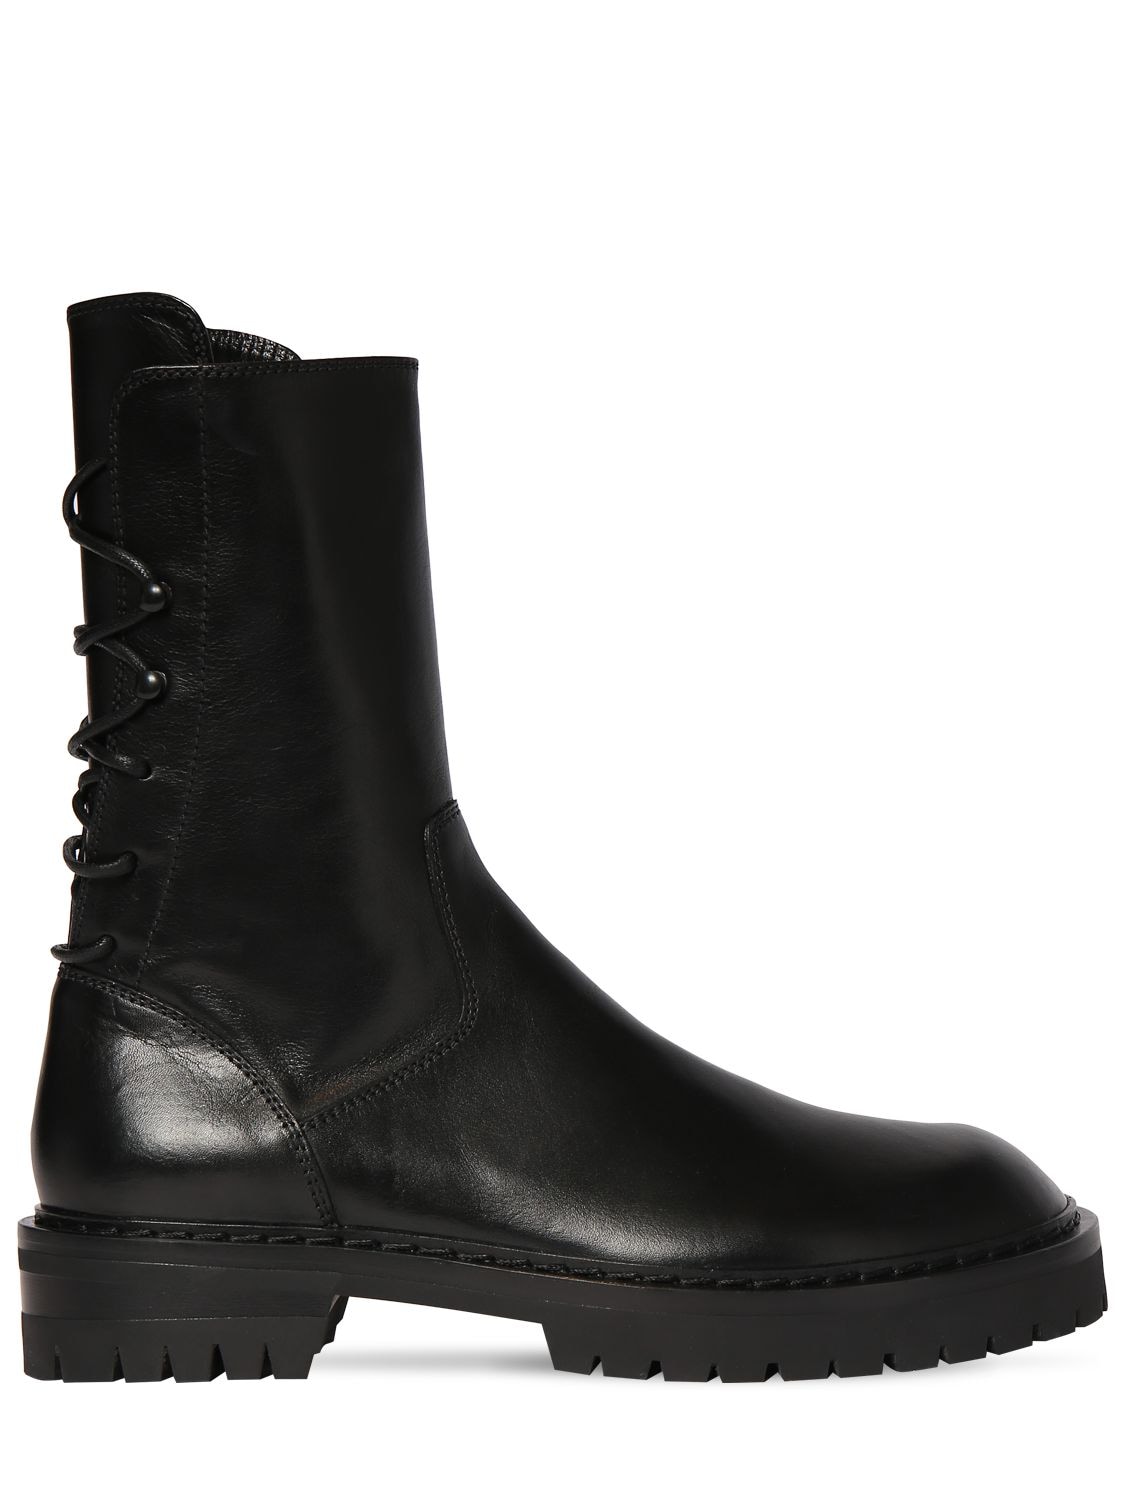 ANN DEMEULEMEESTER 40MM LOUISE LEATHER ANKLE BOOTS